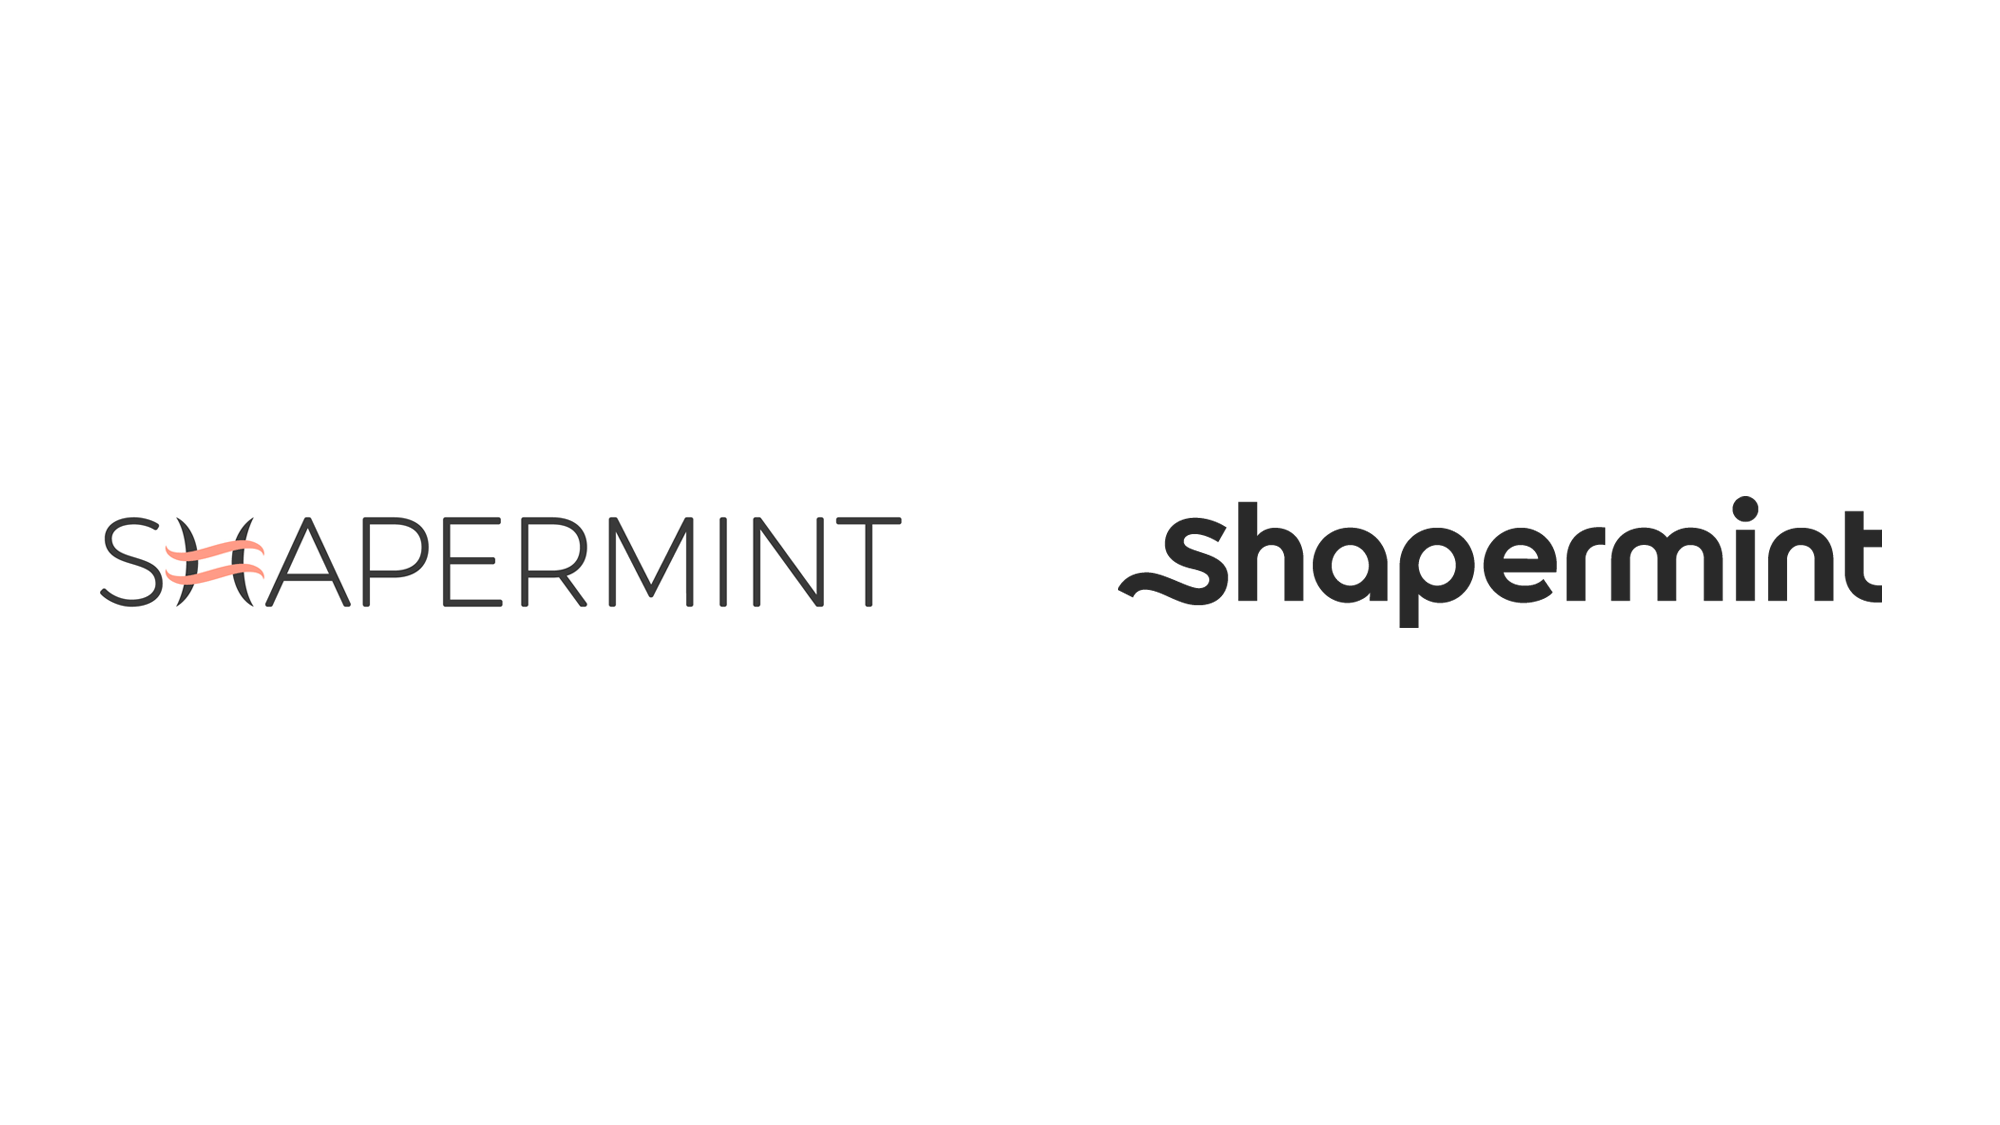 https://www.underconsideration.com/brandnew/wp/wp-content/uploads/2021/04/shapermint_logo_before_after.png